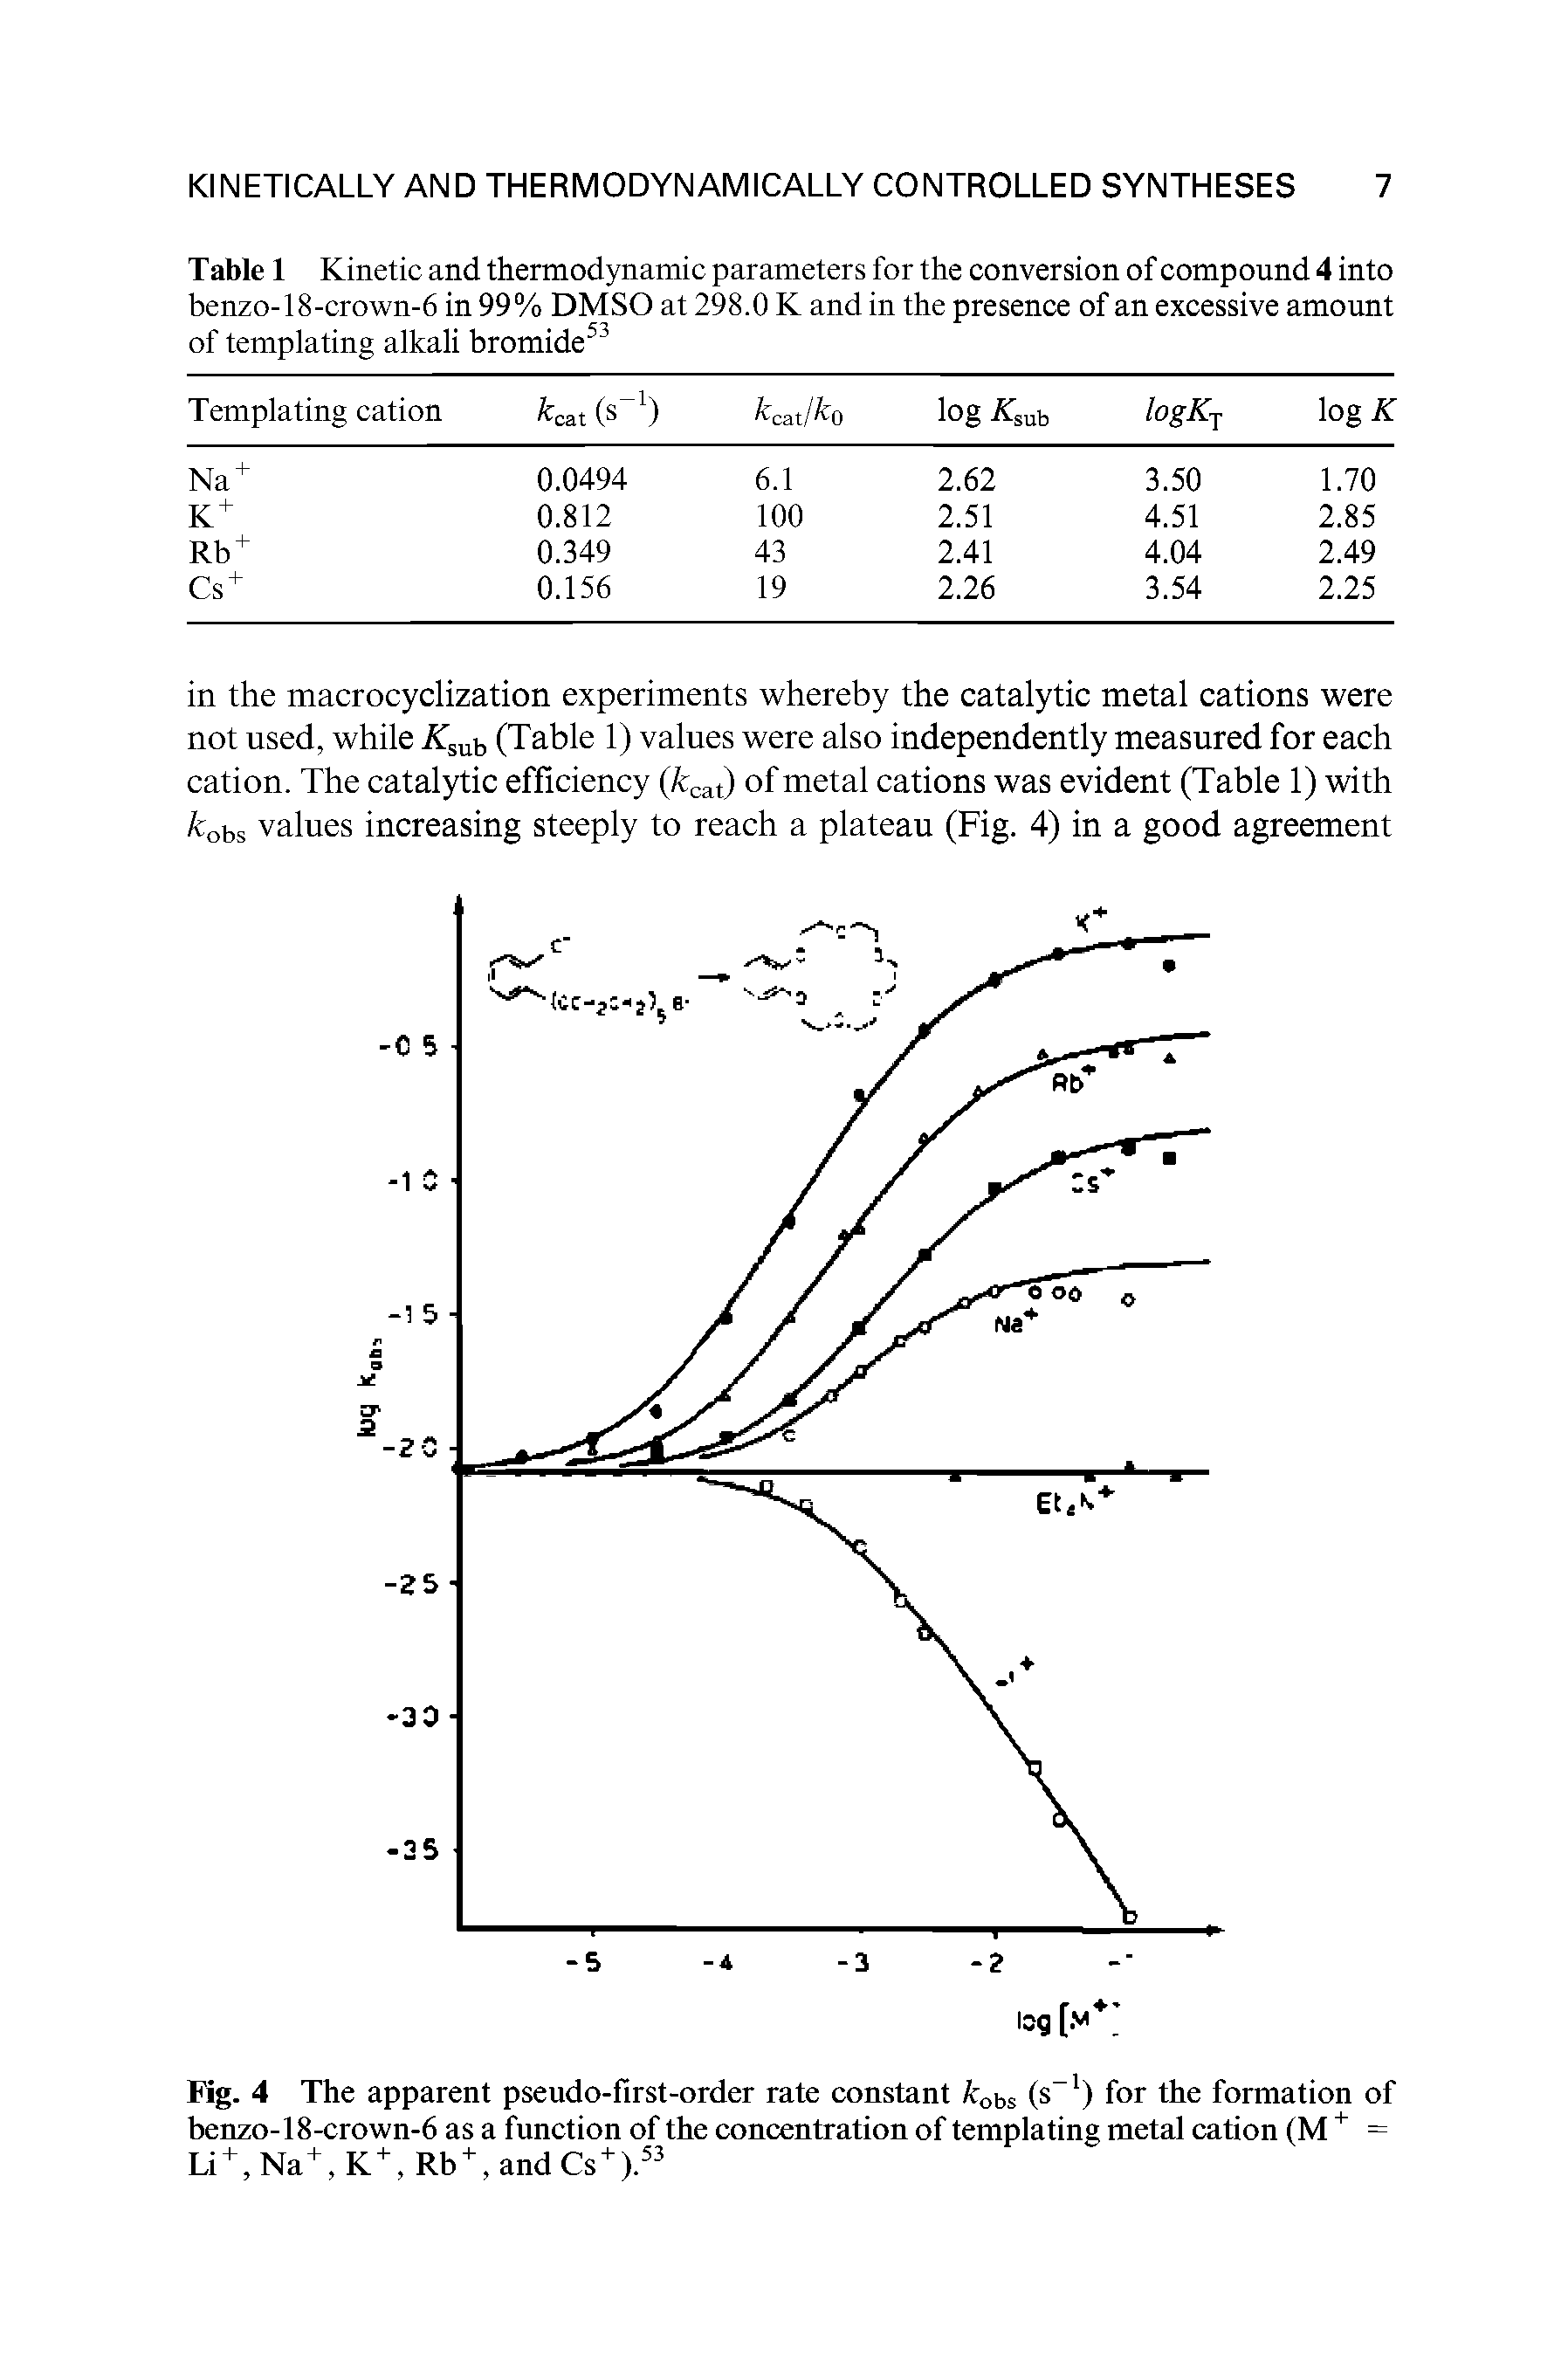 Fig. 4 The apparent pseudo-first-order rate constant /cobs (s ) for the formation of benzo-18-crown-6 as a function of the concentration of templating metal cation (M + = Li +, Na+, K +, Rb +, and Cs + ).53...